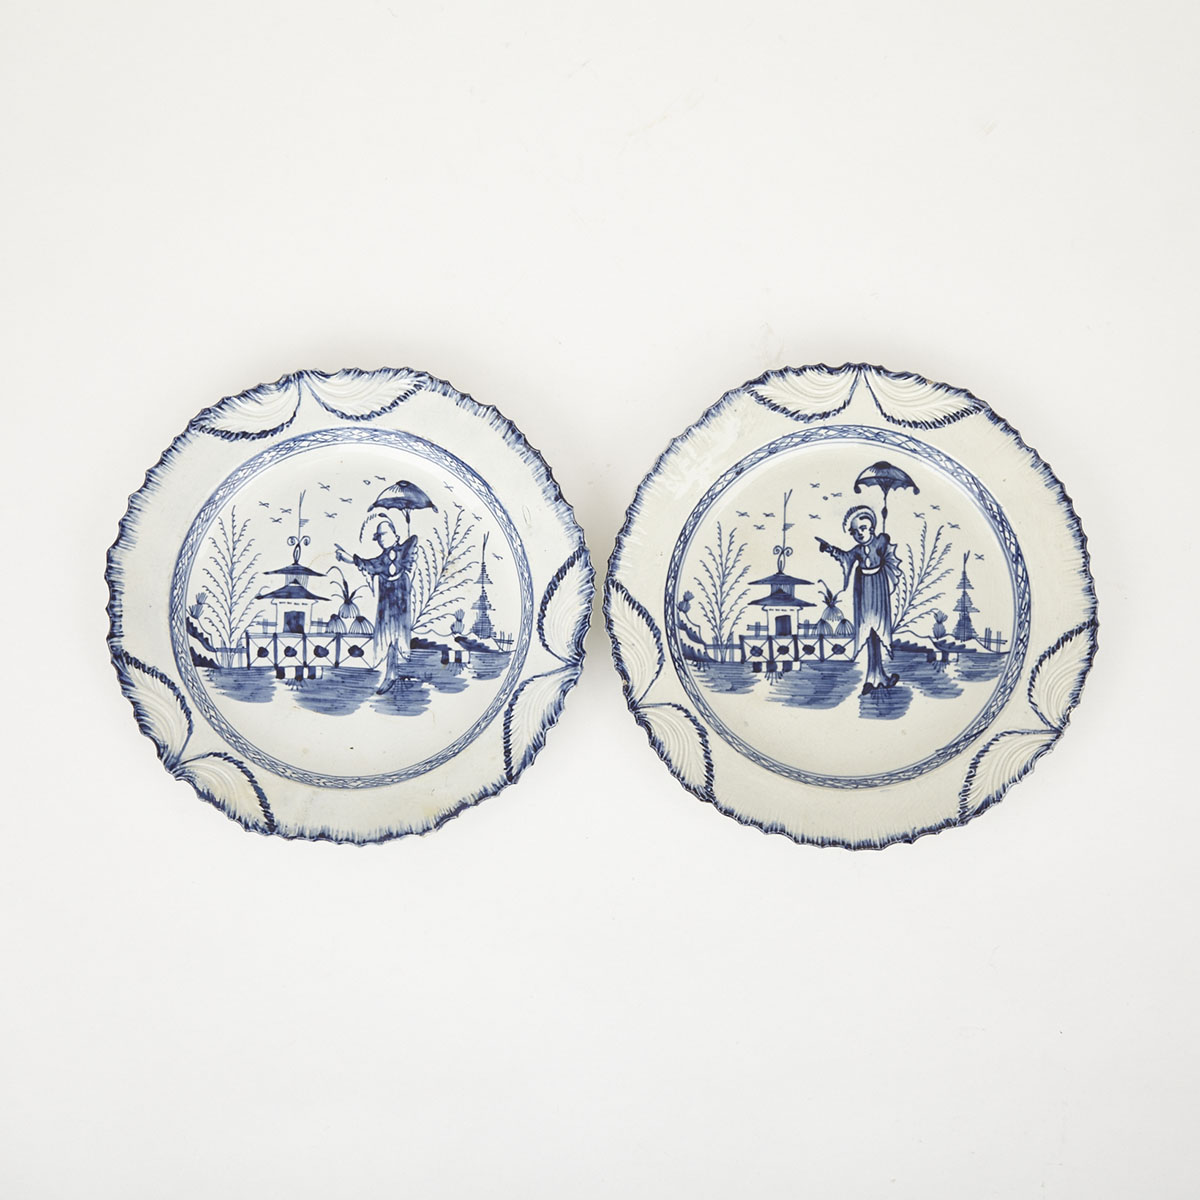 Pair of English Pearlware Chinoiserie Plates, late 18th century